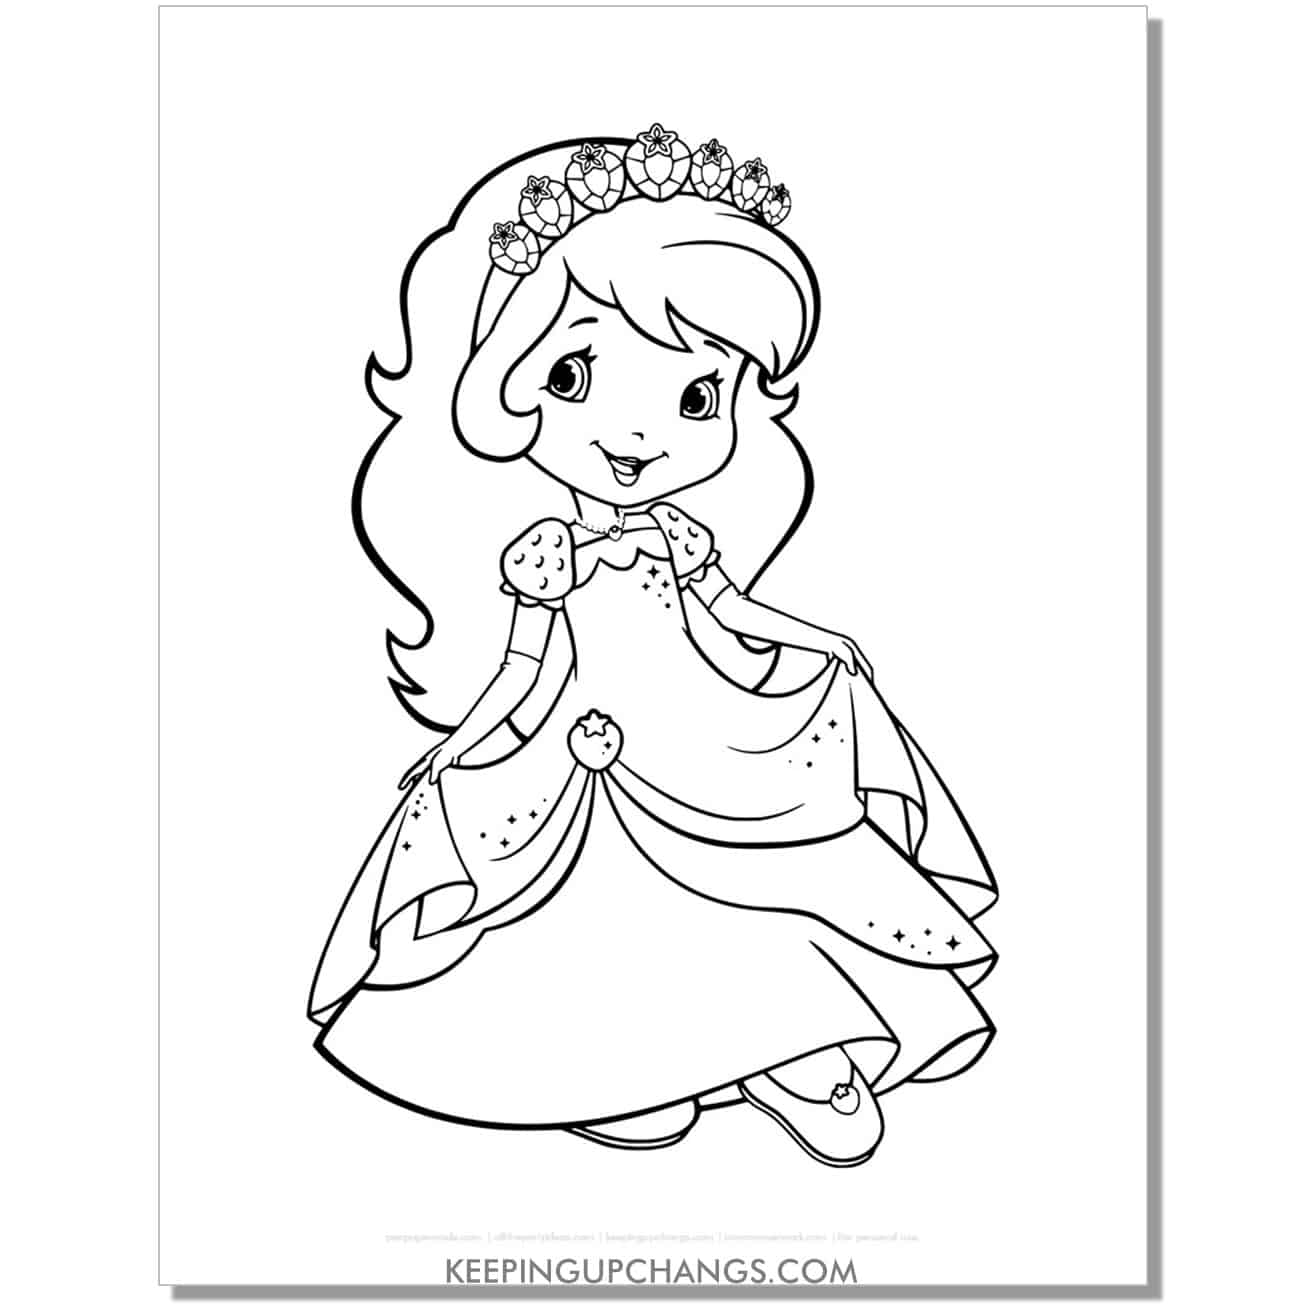 free strawberry shortcake in gown and tiara coloring page, sheet.